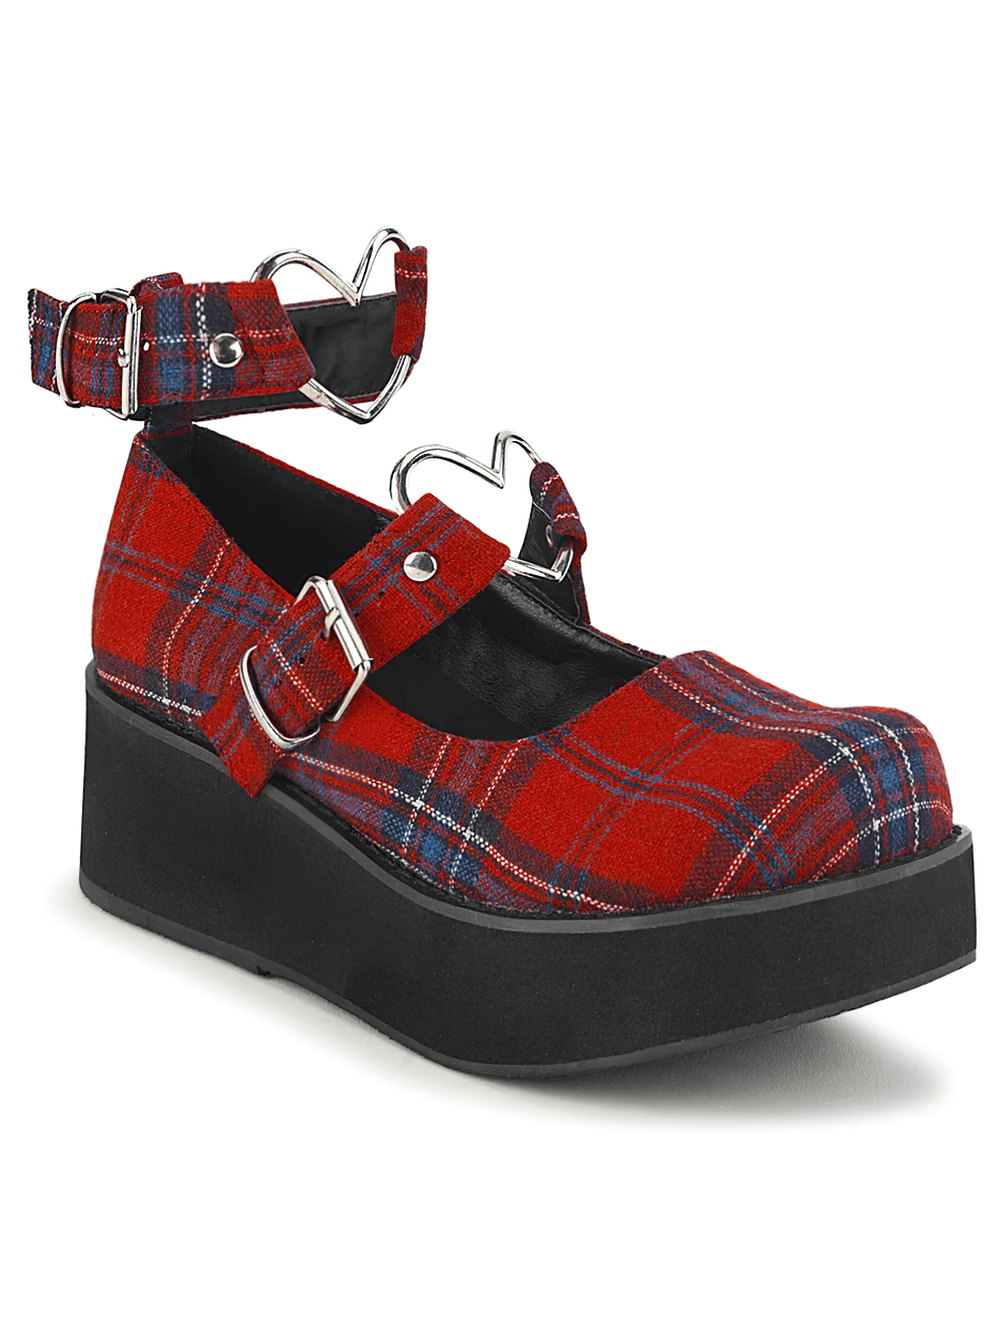 DEMONIA Red Plaid Platforms Shoes with Heart Buckles